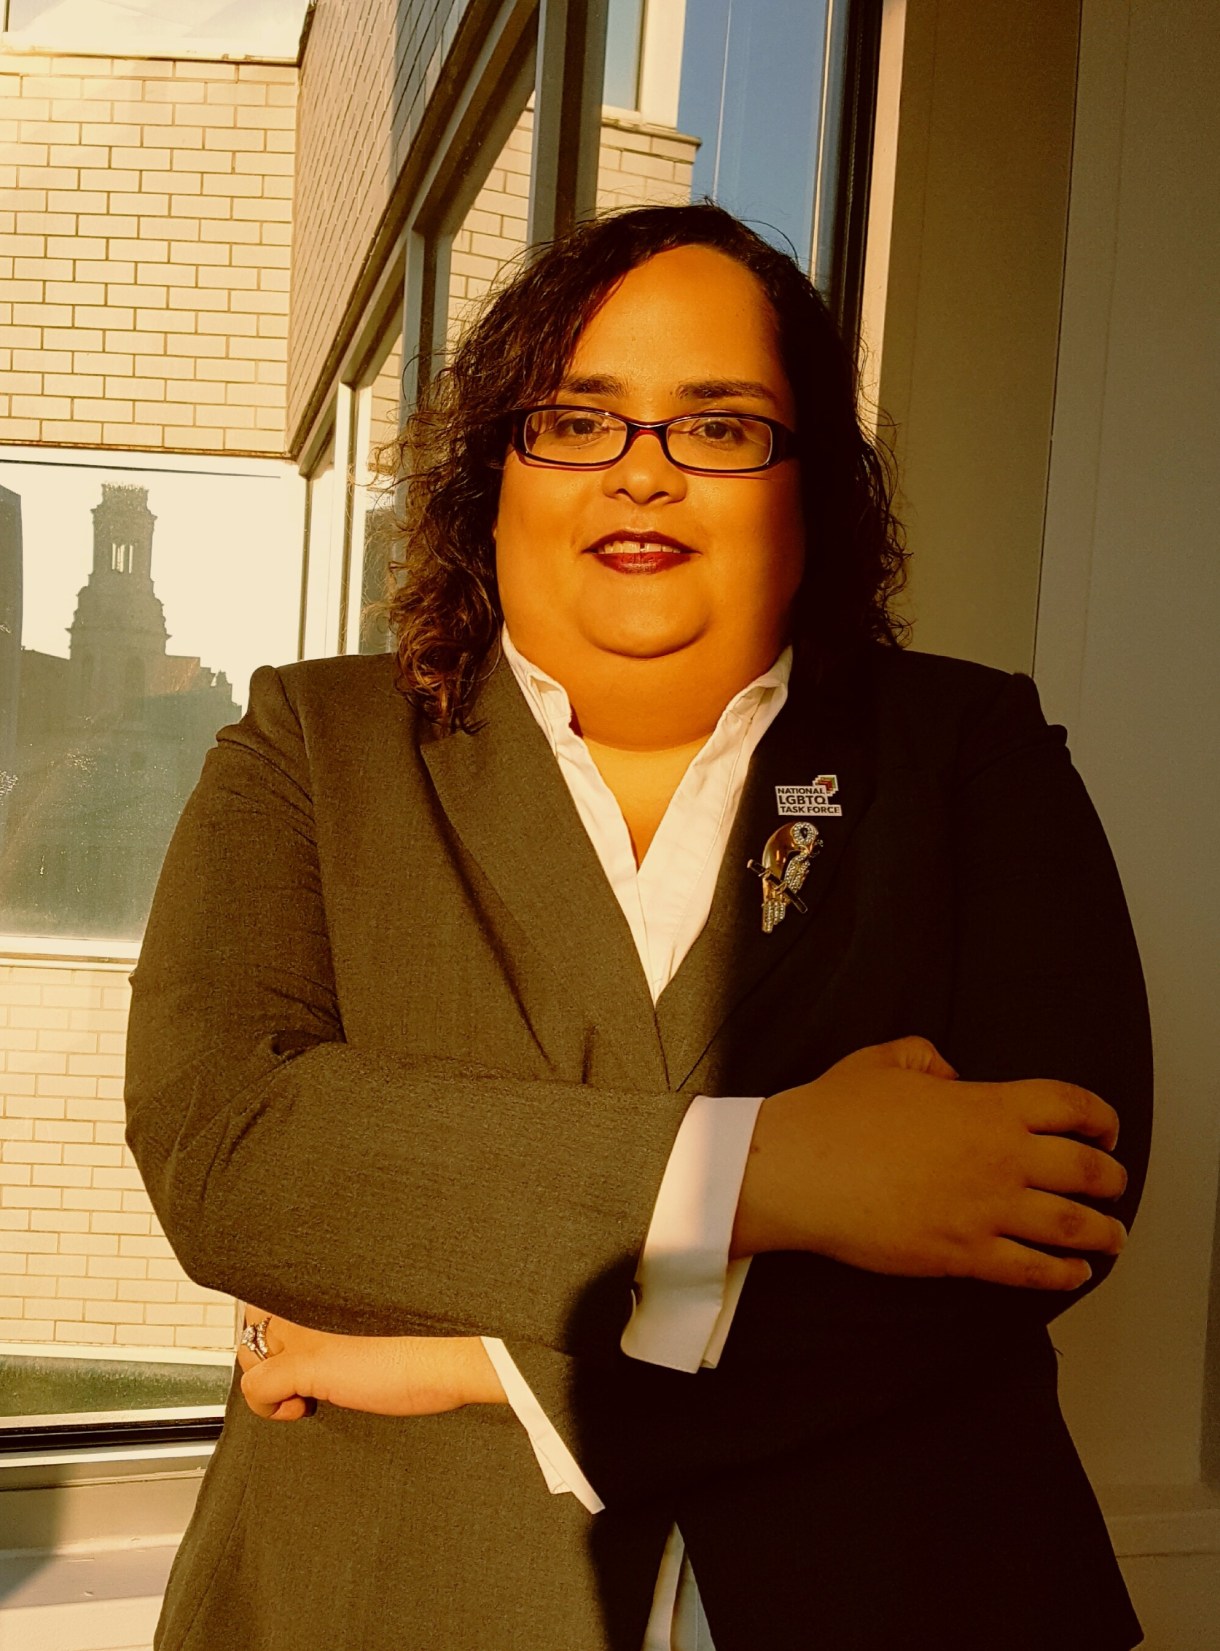 A Latina woman with square eyeglasses and red lips wearing a white shirt and black blazer stands with her arms crossed in front of a white brick building. The sun is lighting up her face and the right half of her body; her left arm is in shadow.